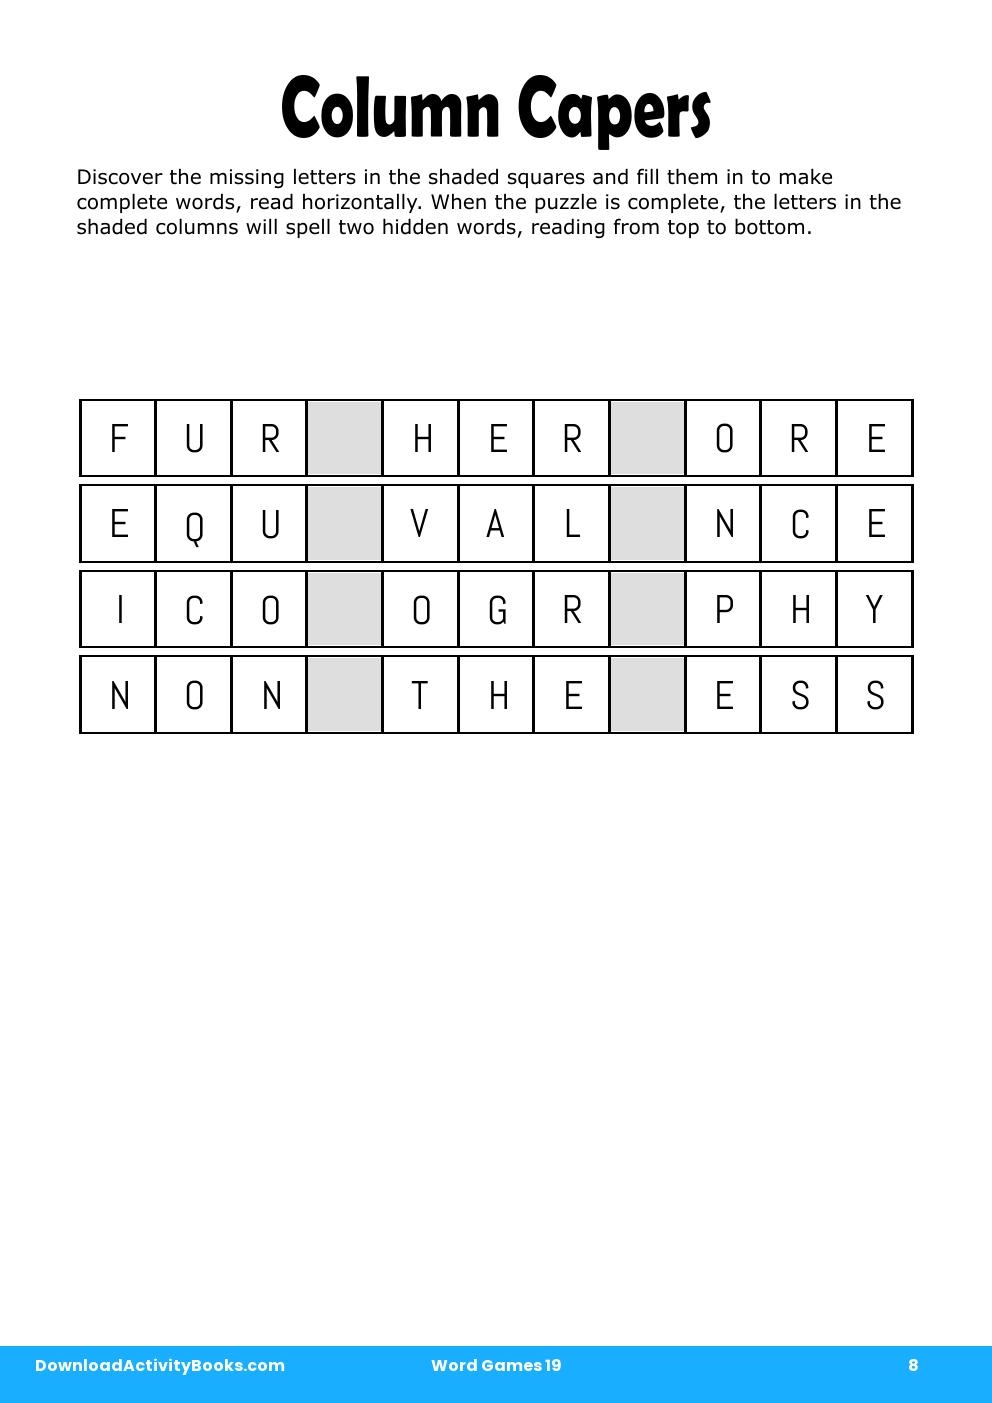 Column Capers in Word Games 19